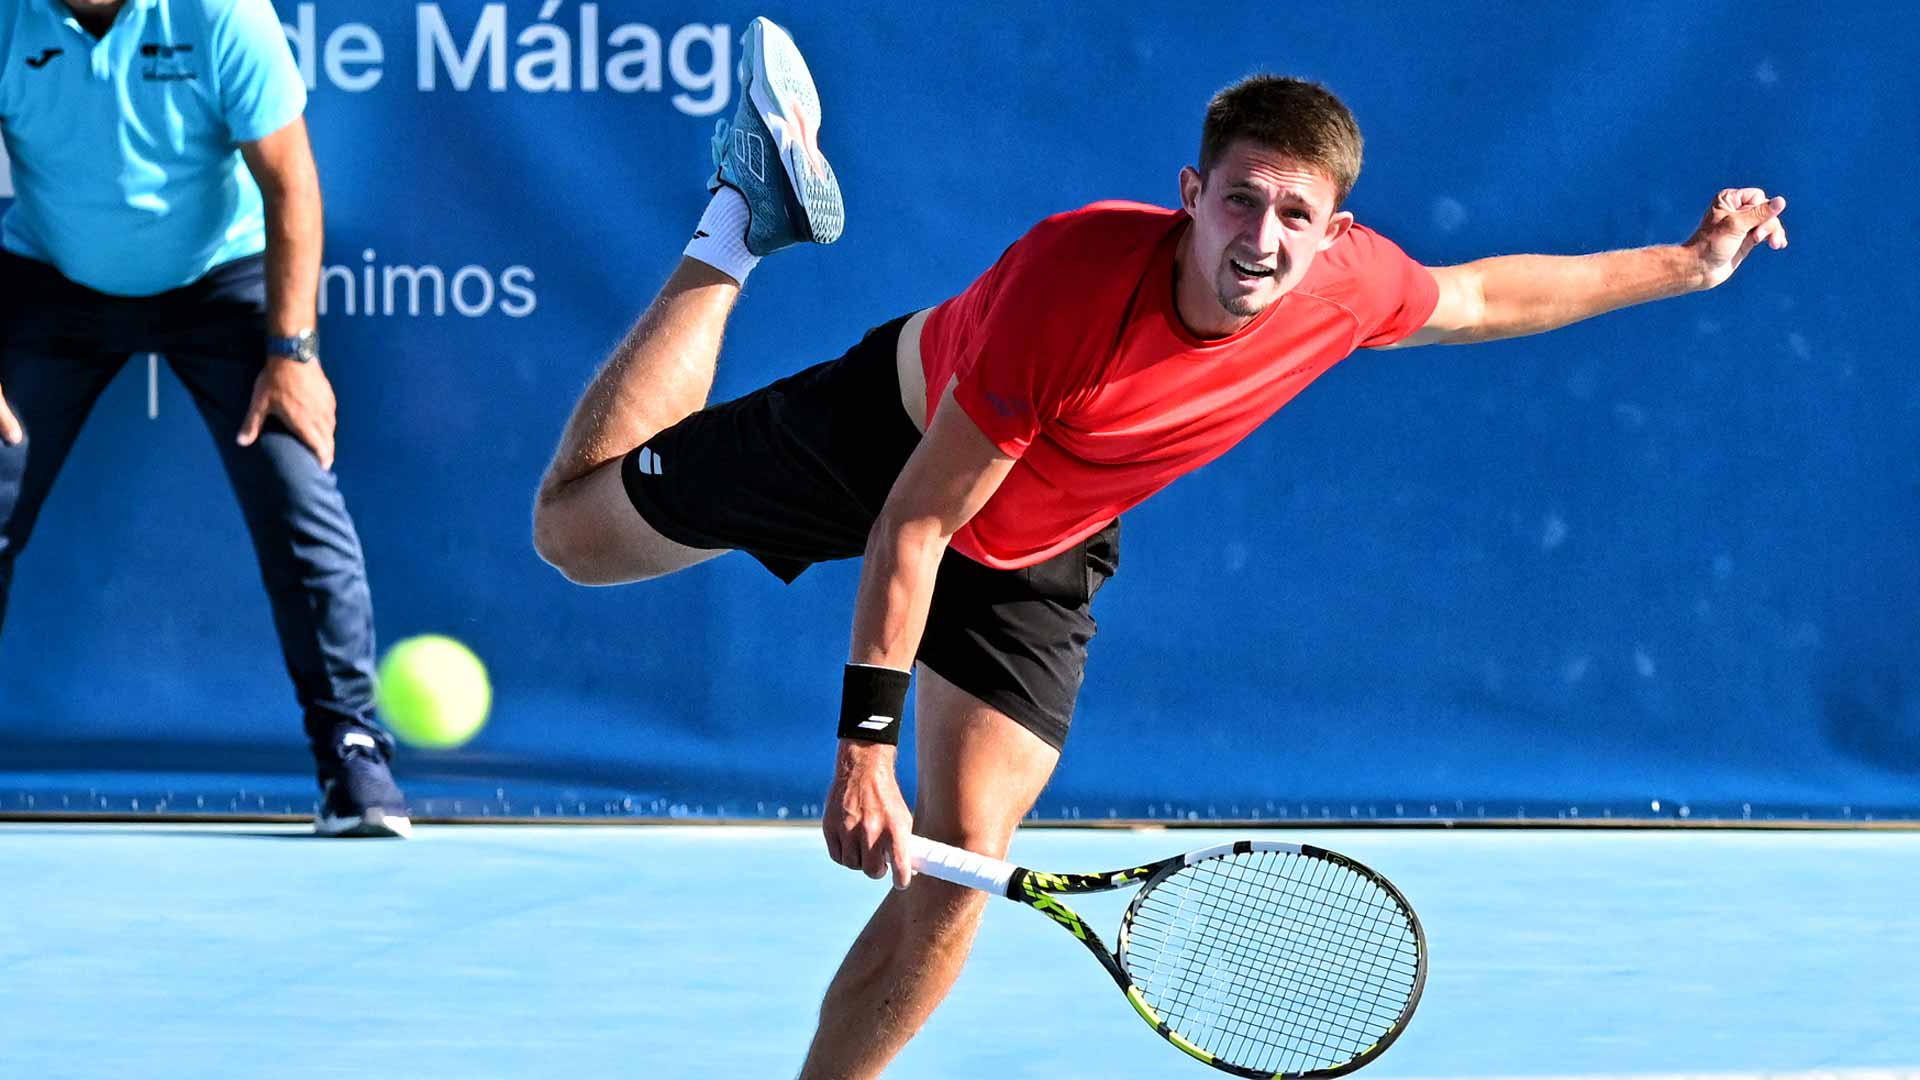 <a href='https://www.atptour.com/en/players/ugo-blanchet/bv16/overview'>Ugo Blanchet</a> wins the Challenger 125 event in Malaga, Spain.